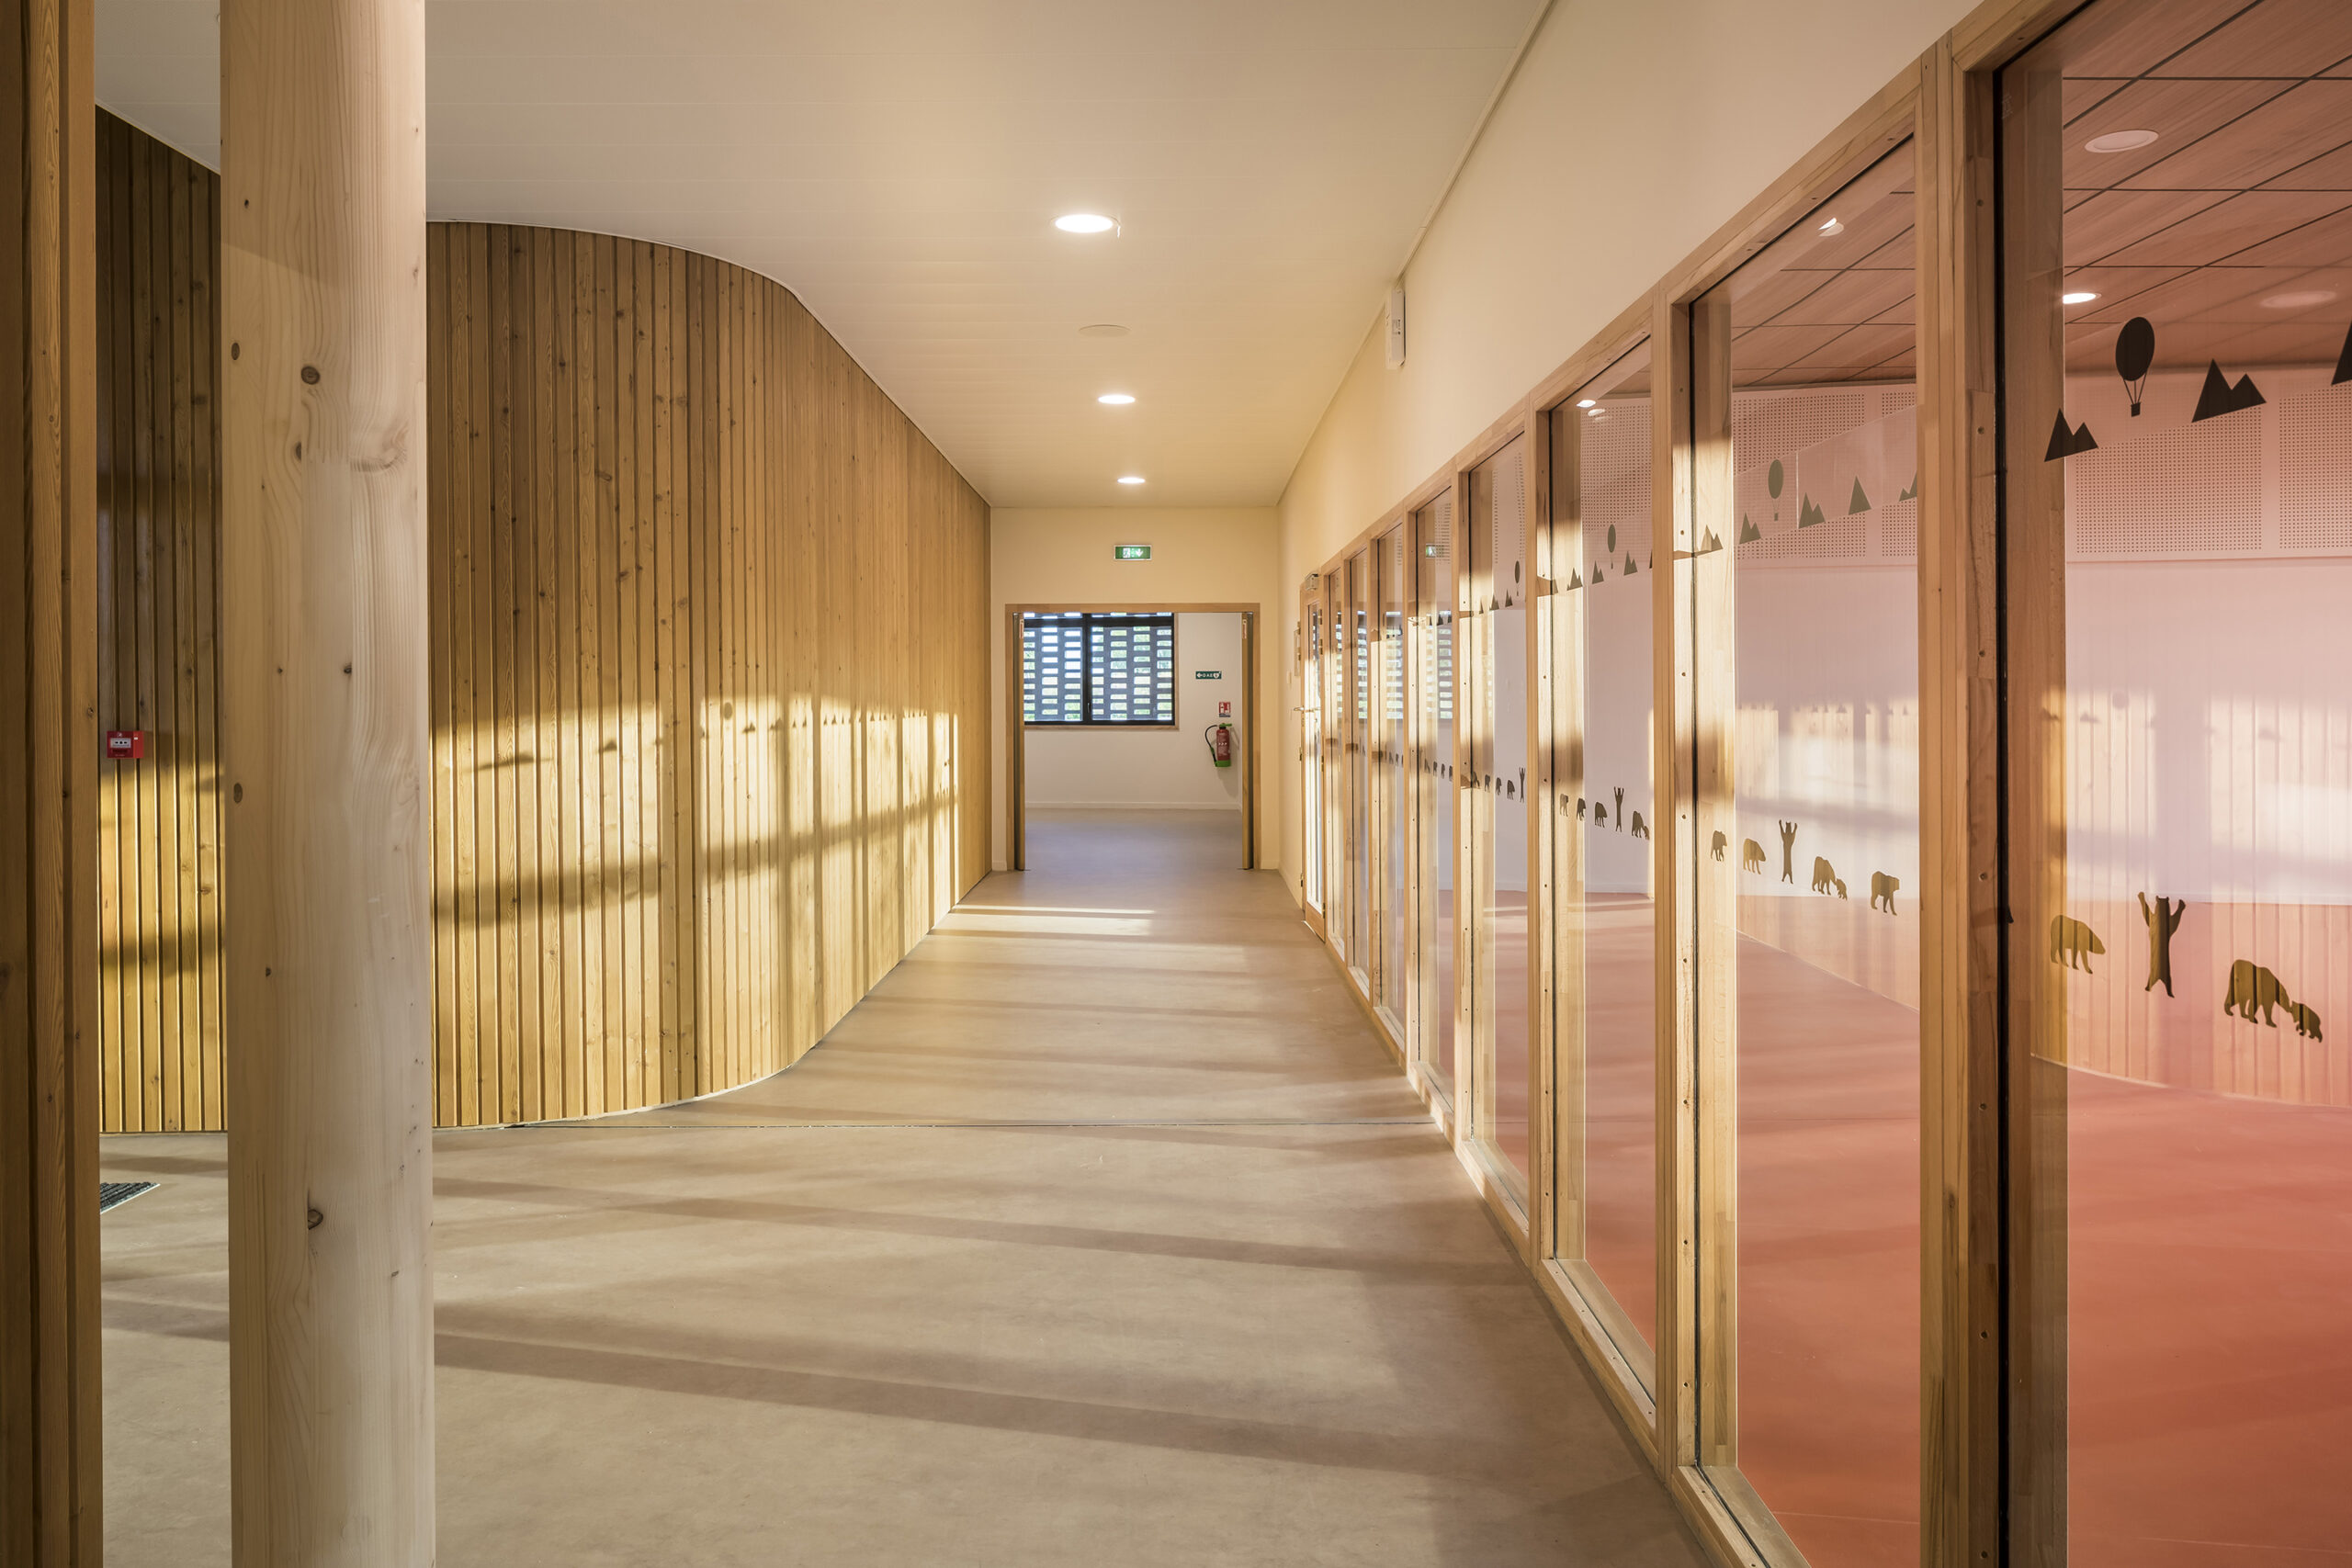 A close up shot of the school's interior, showing wooden cladding and window frames. 